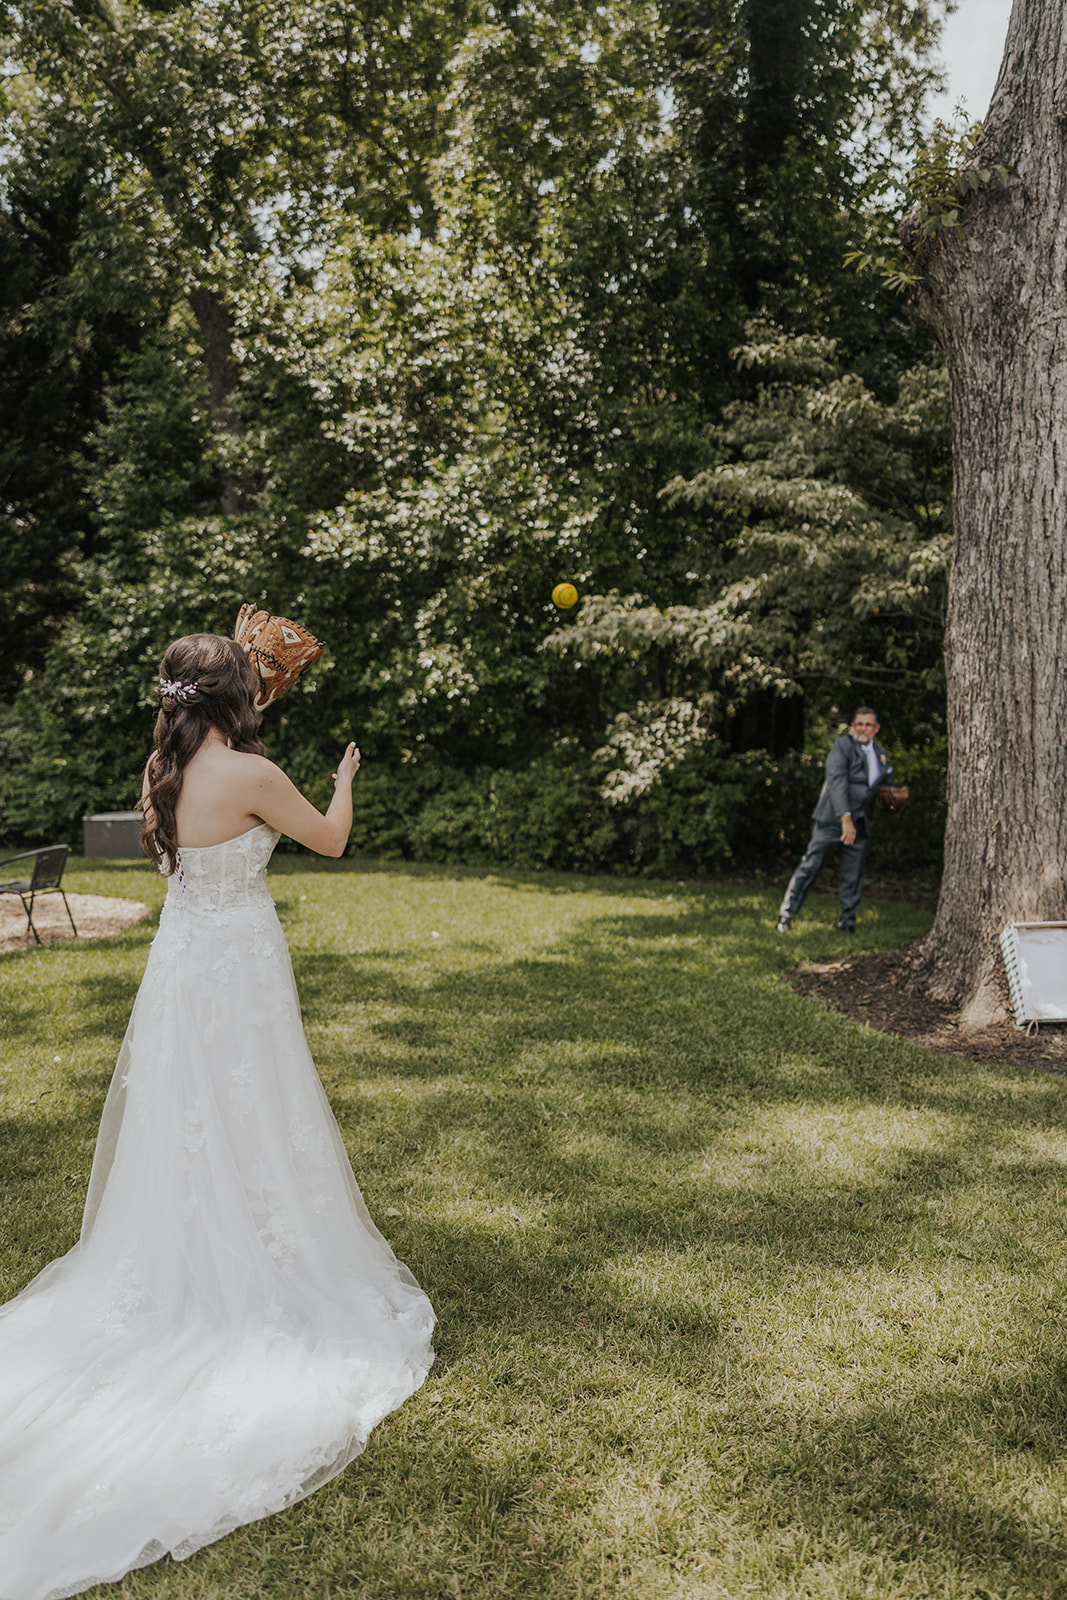 bride plays catch with her dad on her wedding day. Plan your perfect wedding day timeline!